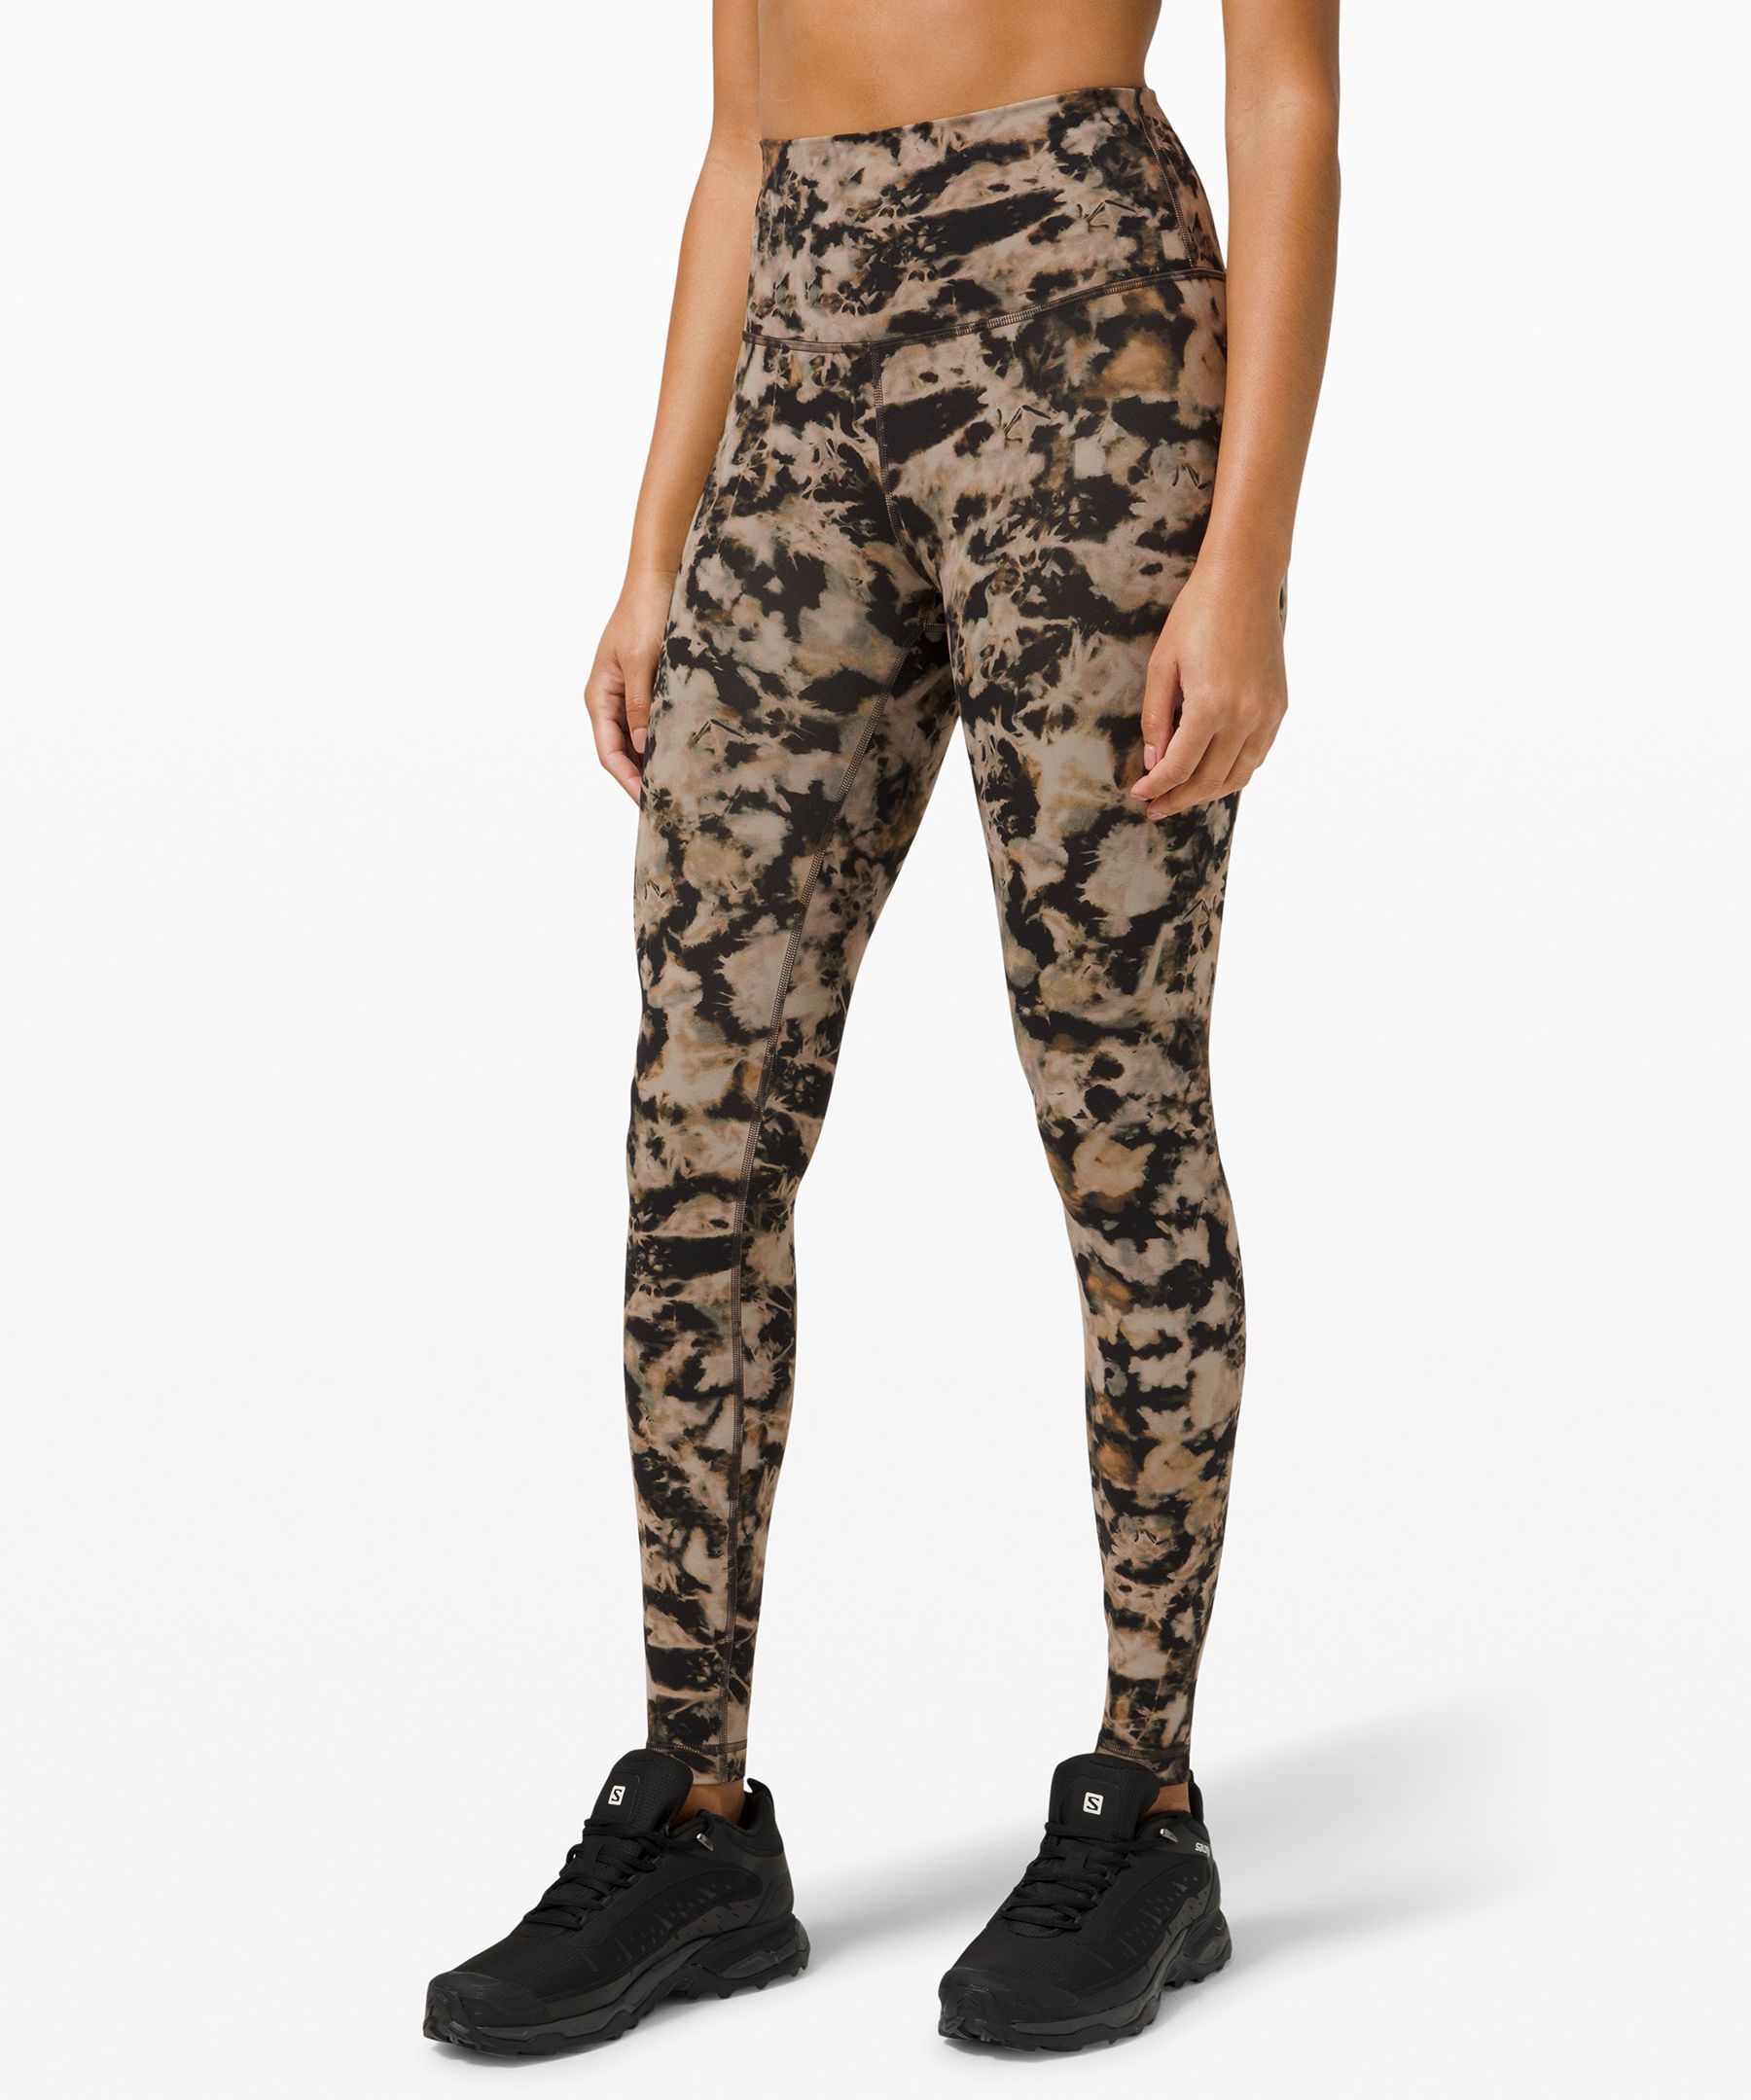 Lululemon Wunder Train High-rise Tight 28" In Printed